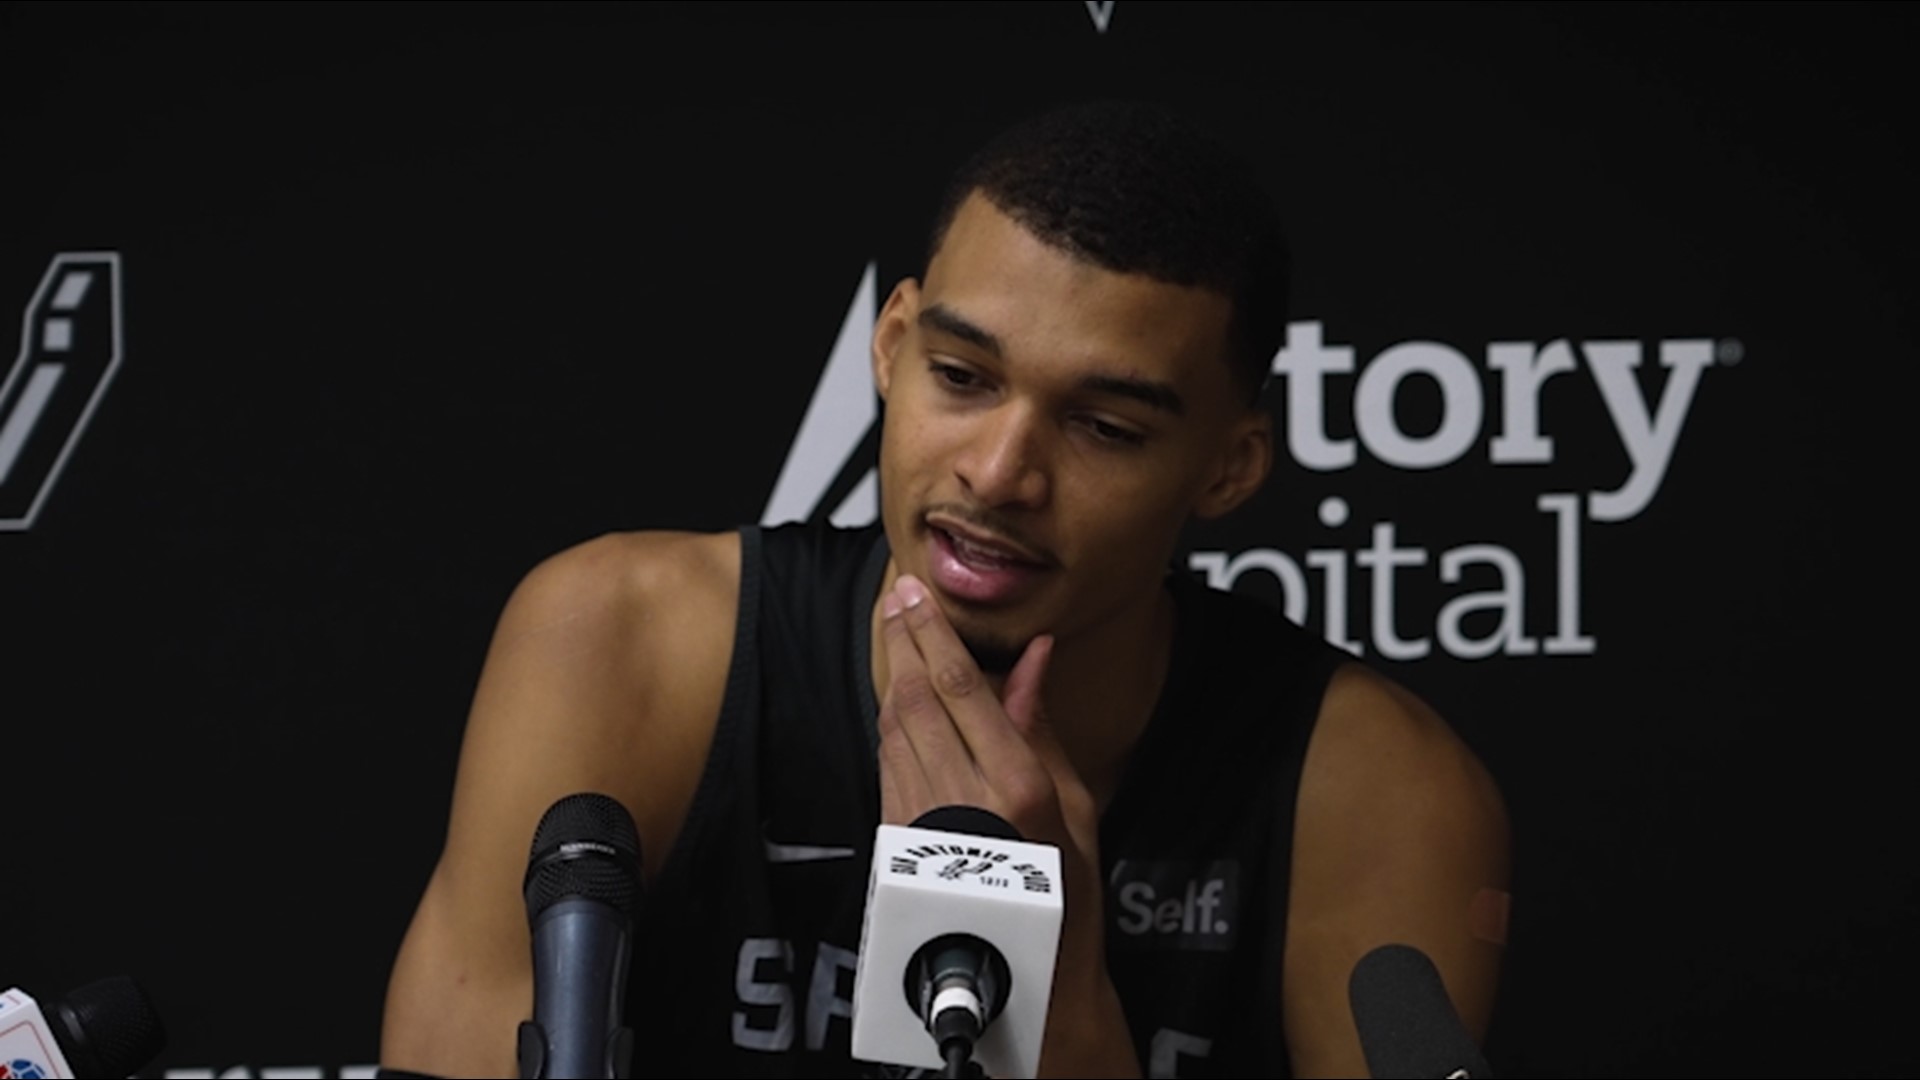 The star rookie for the Spurs spoke in English and French about the season opener, experimenting on defense, his career goals, and more.